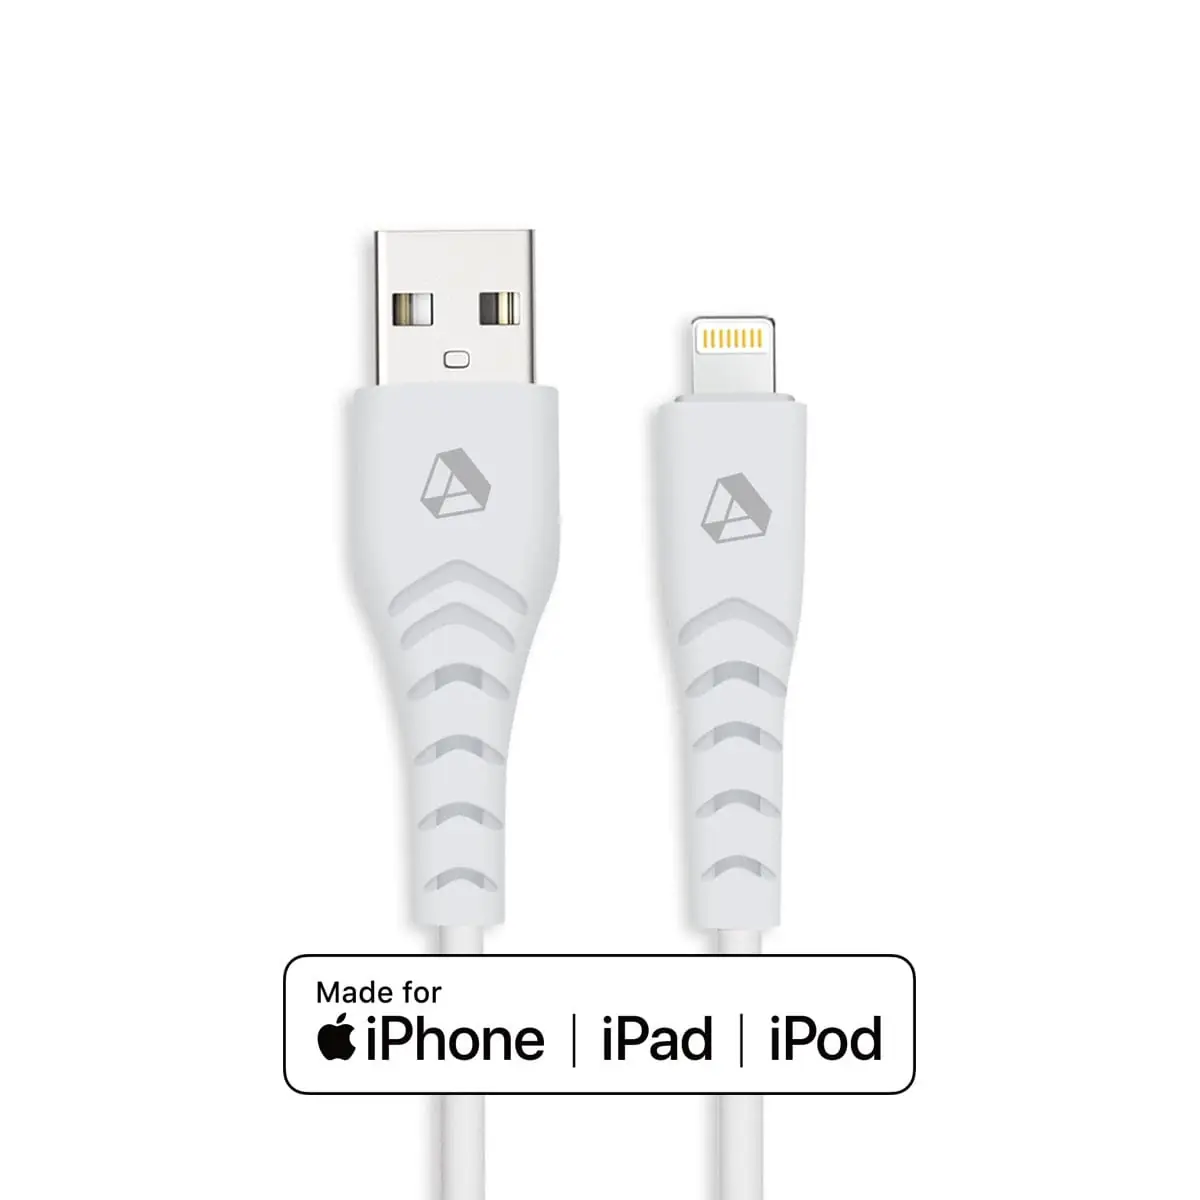 The Adreama Eco-friendly Lightning to USB-A Cable - 1.5m: Reducing Waste and Promoting Sustainability